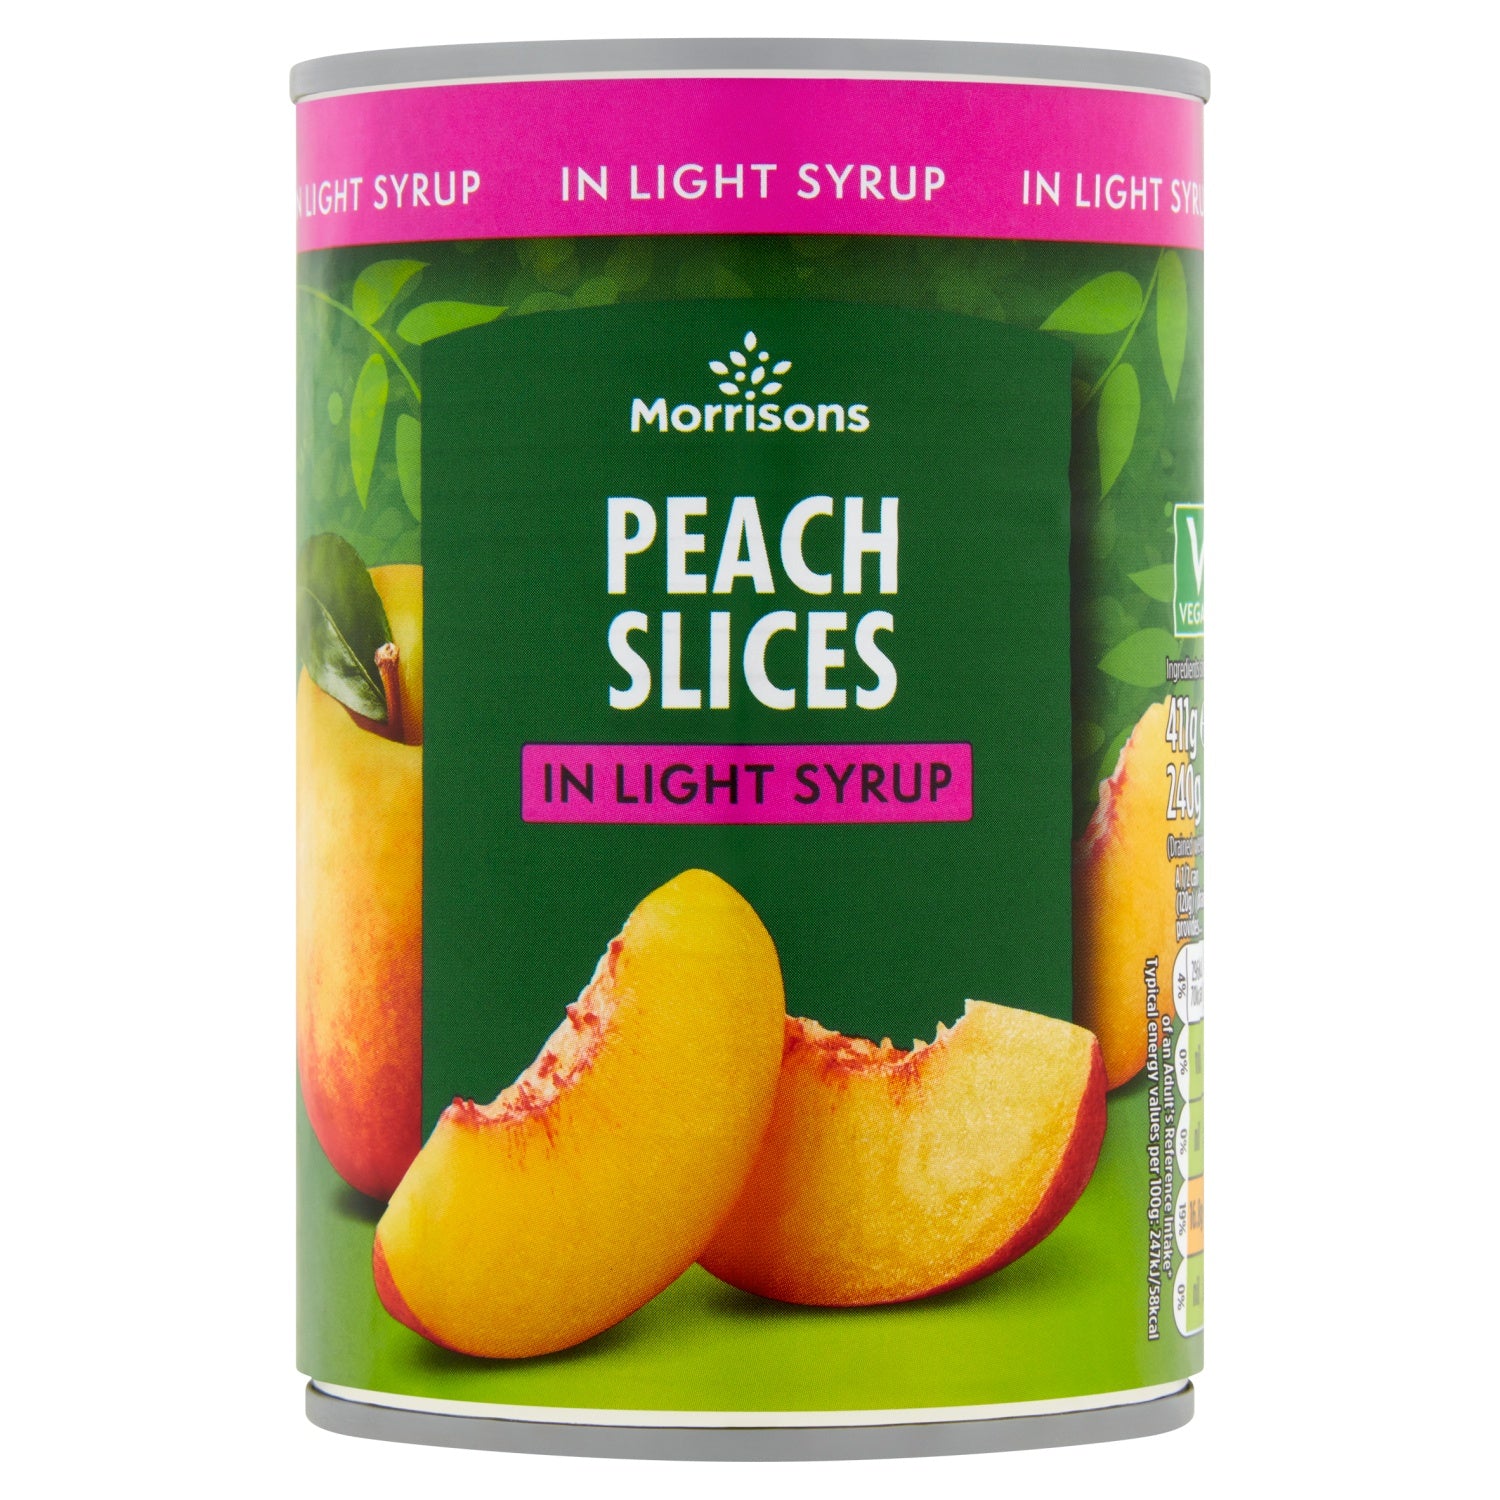 Morrisons Peach Slices In Light Syrup 411g